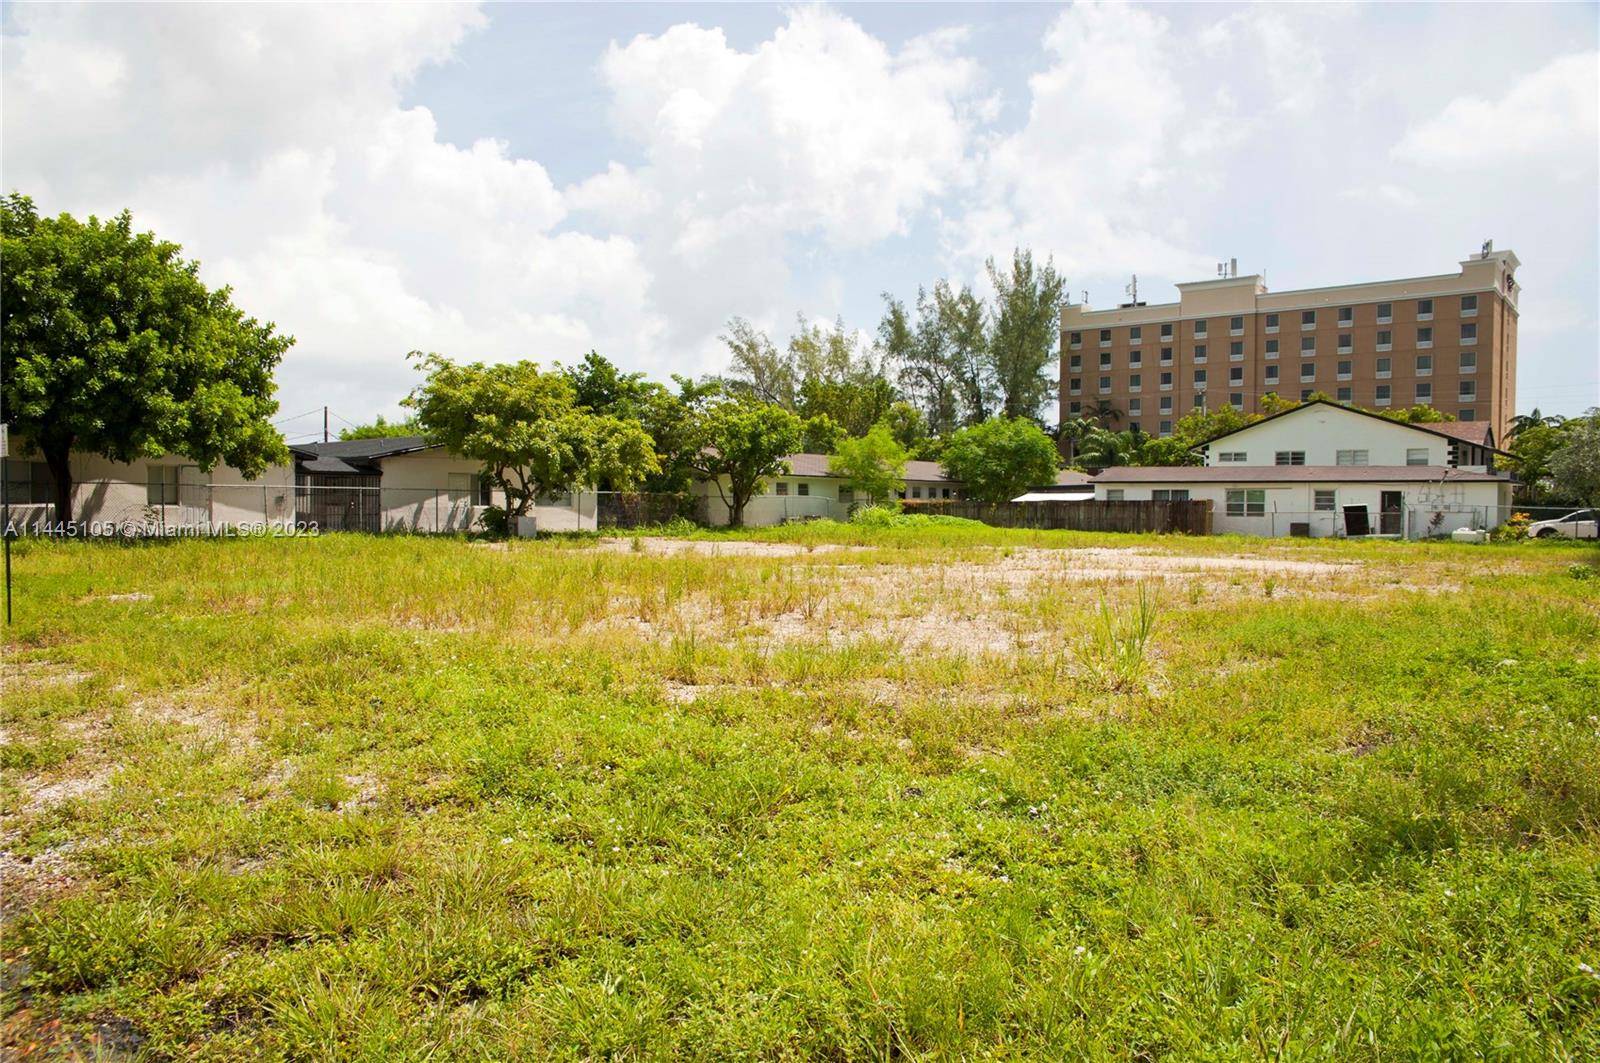 Vacant lot of 16, 514sq. ft.